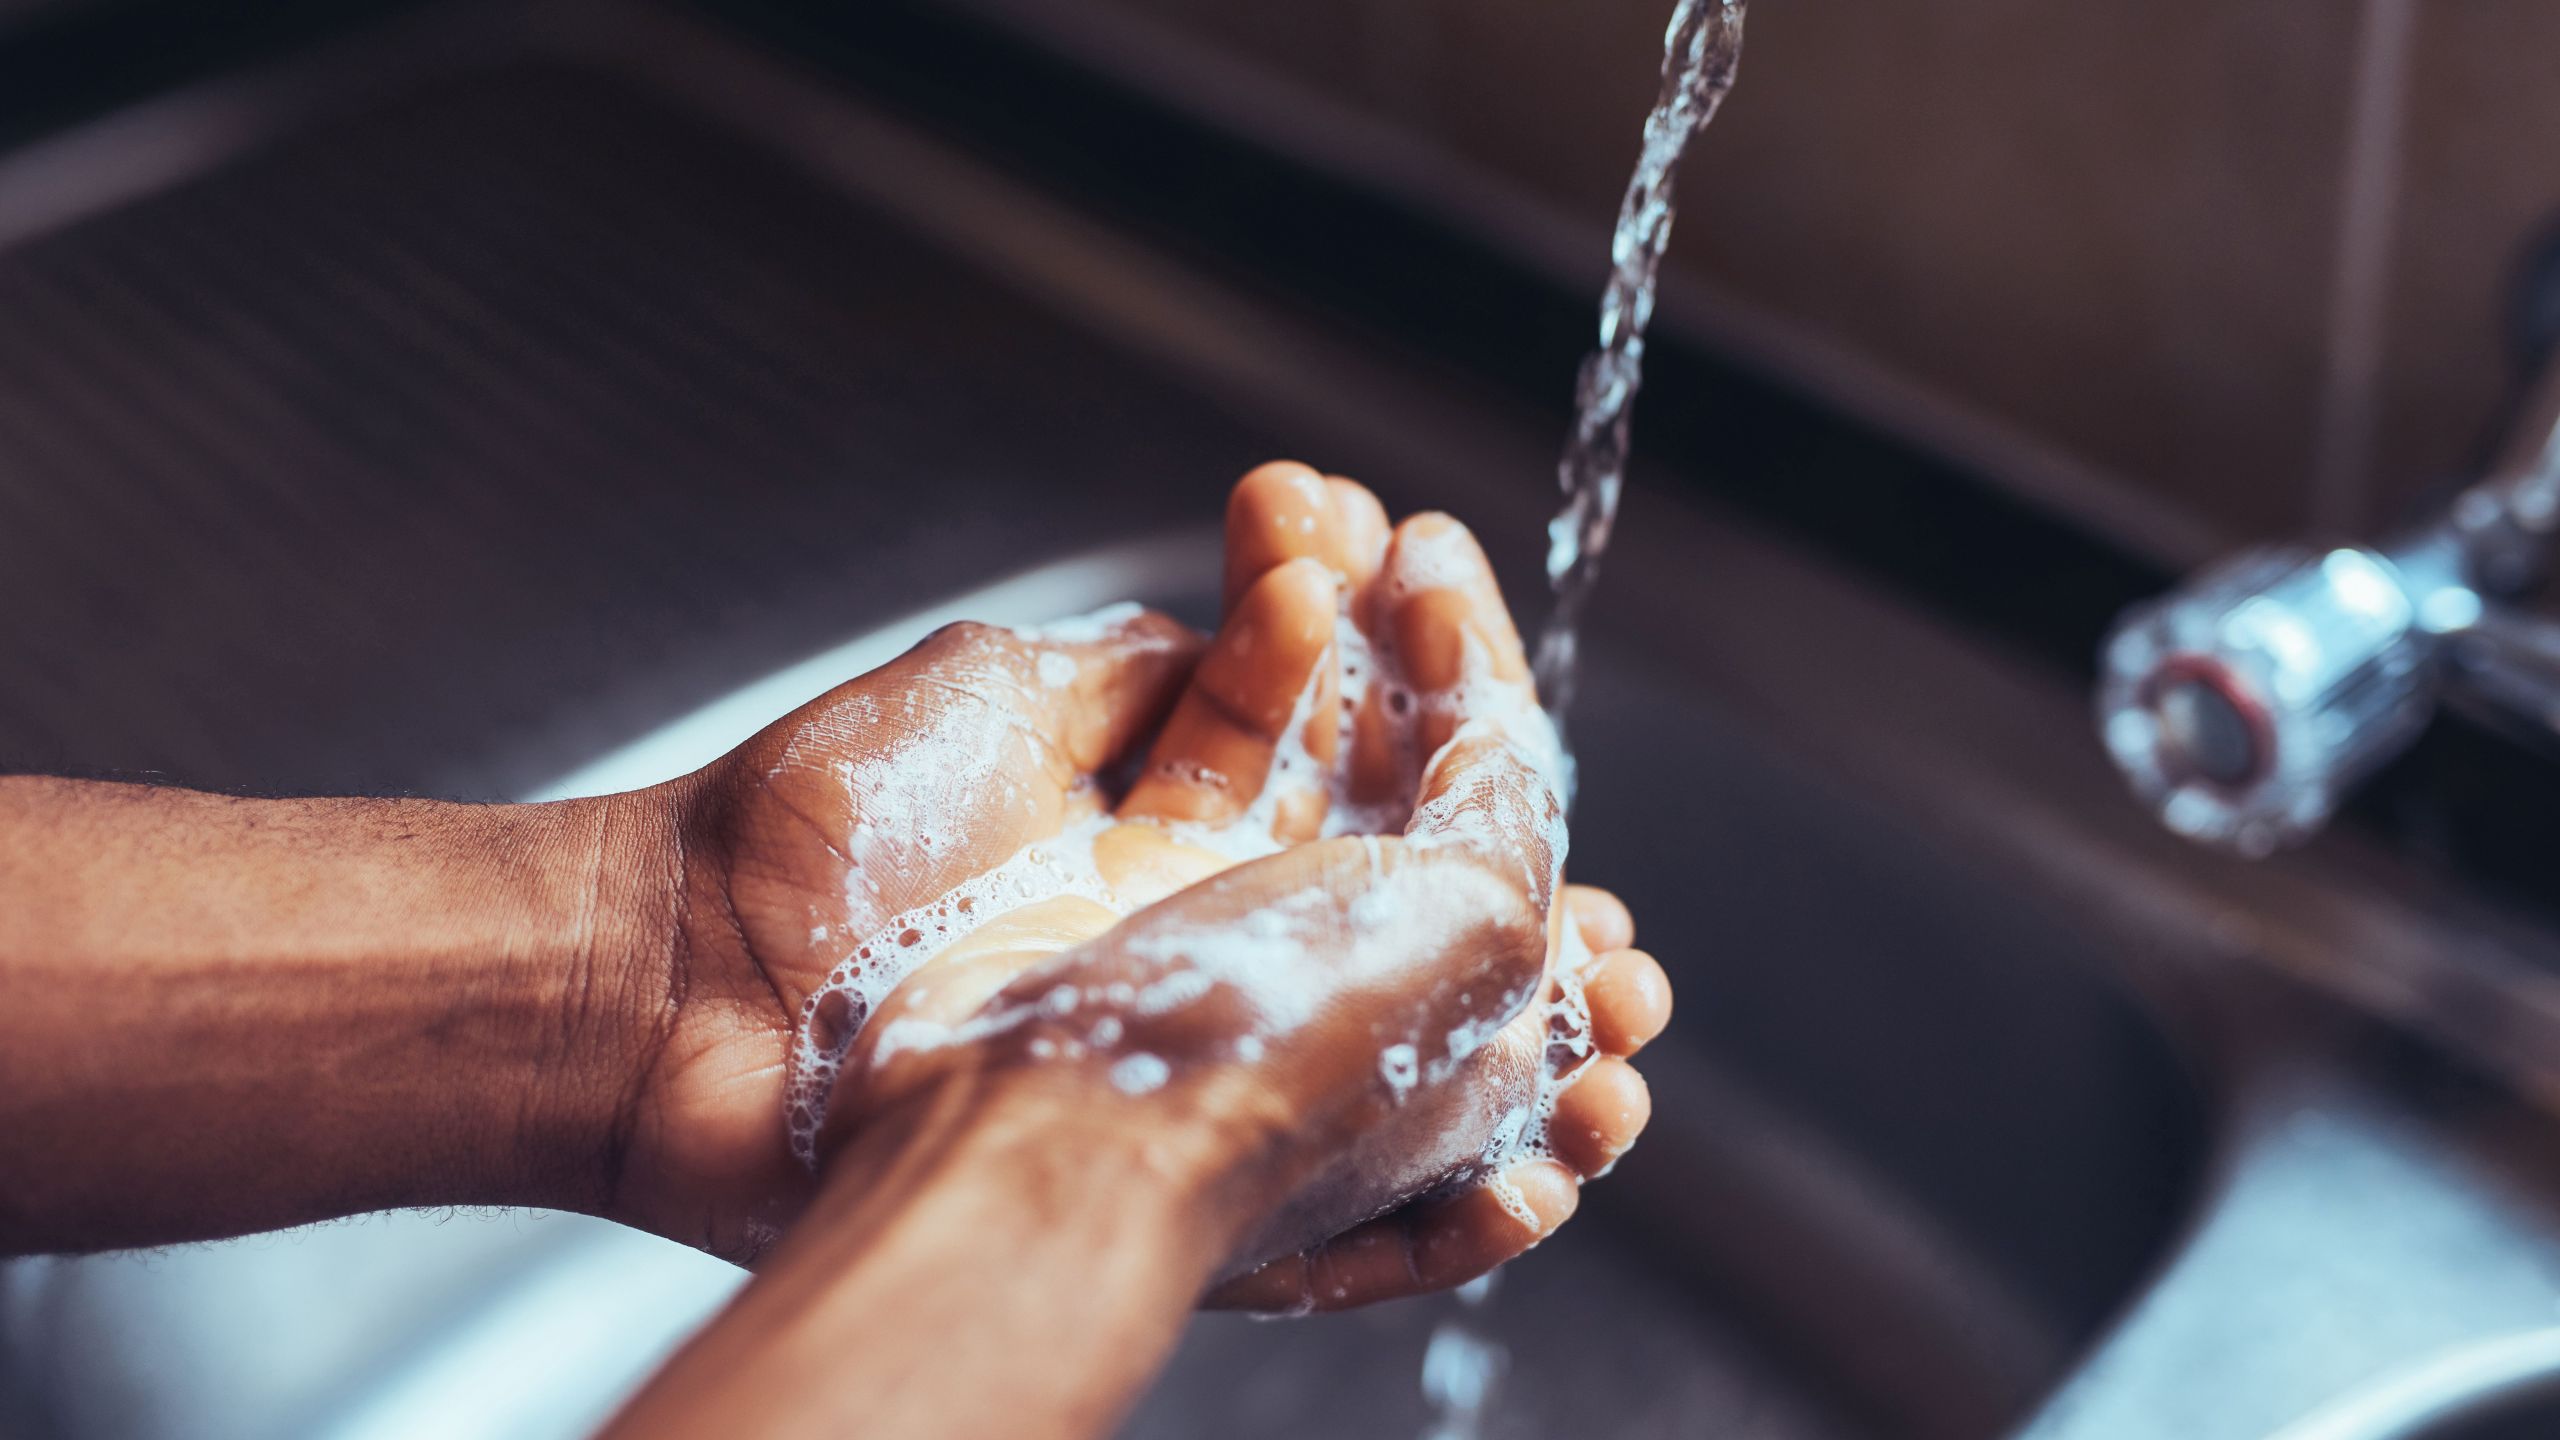 Songs To Wash Your Hands While Preventing Spread Of Coronavirus